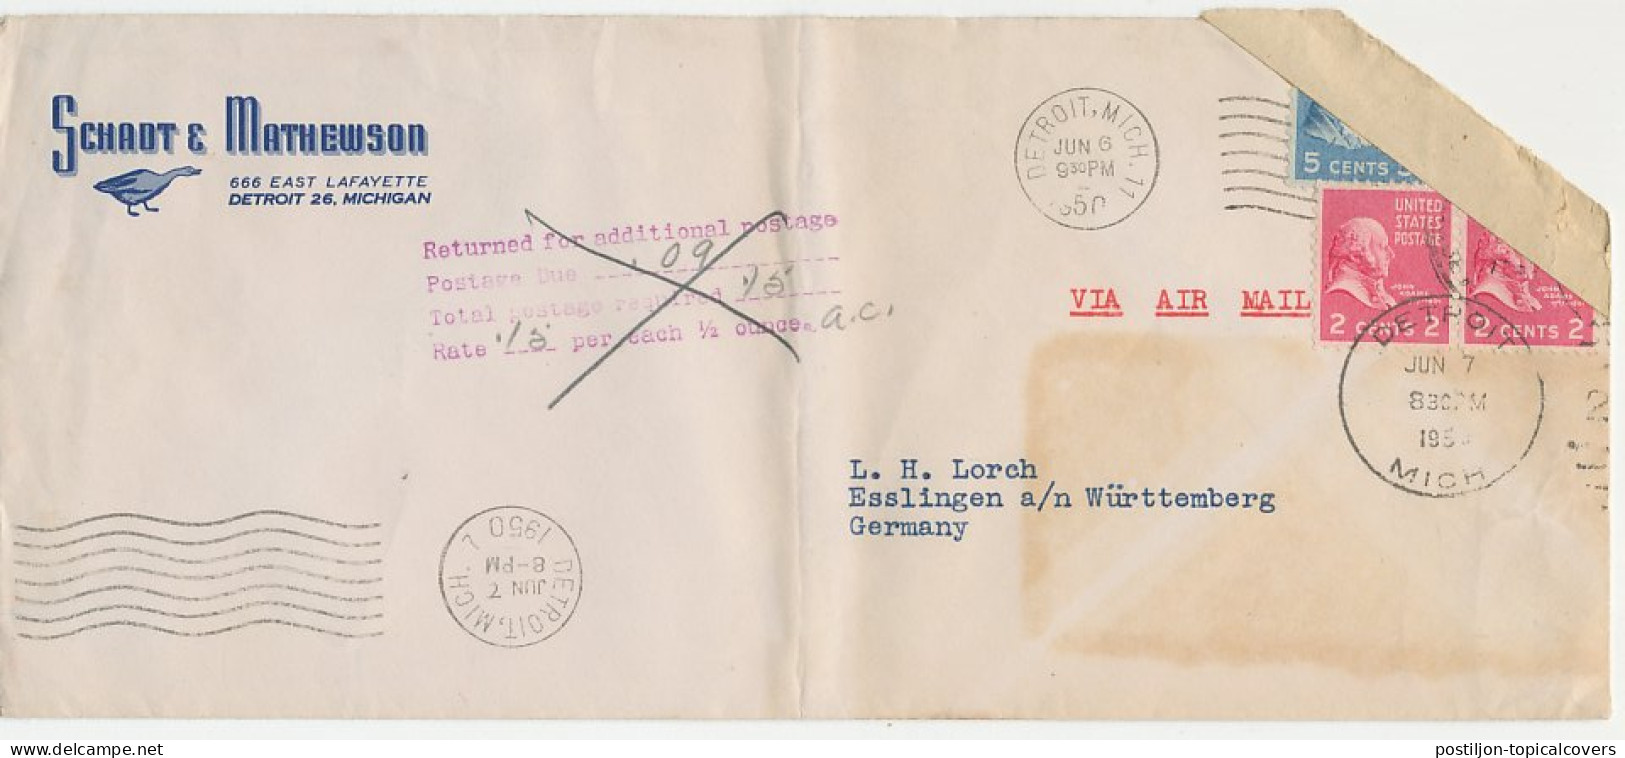 Damaged Mail Cover USA - Germany 1950 Received Damaged - Officially Repaired - Tape - Seal - Unclassified